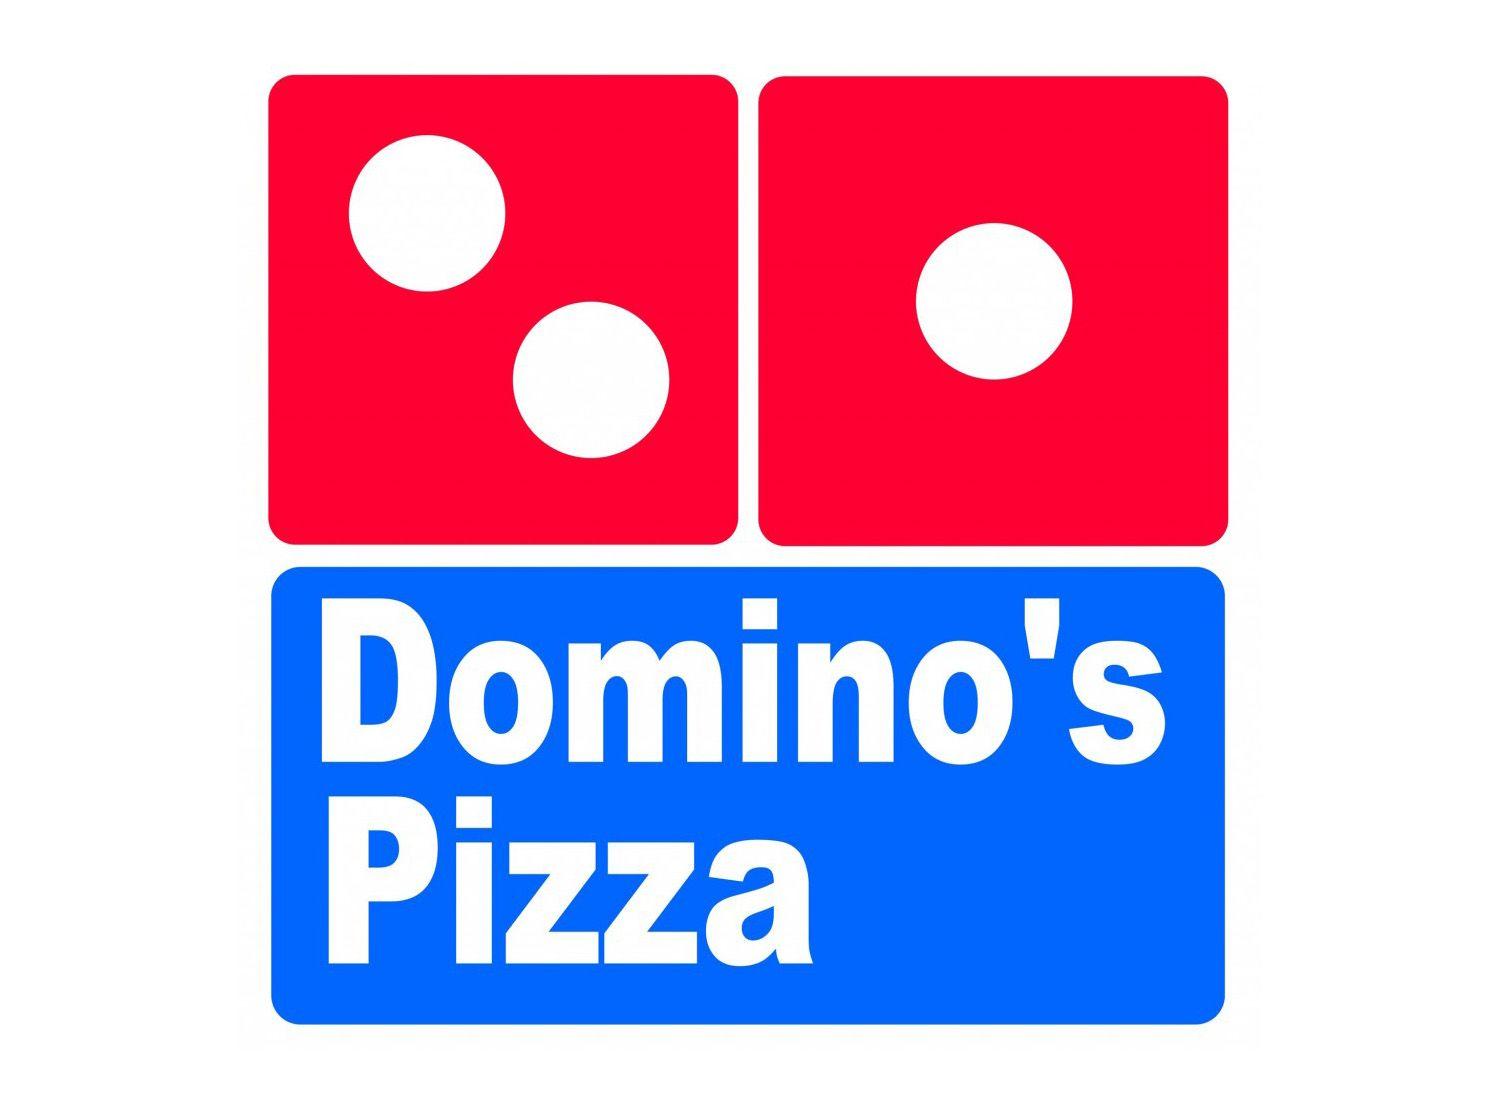 Domino's Pizza Logo - Domino's Logo, Domino's Symbol, Meaning, History and Evolution